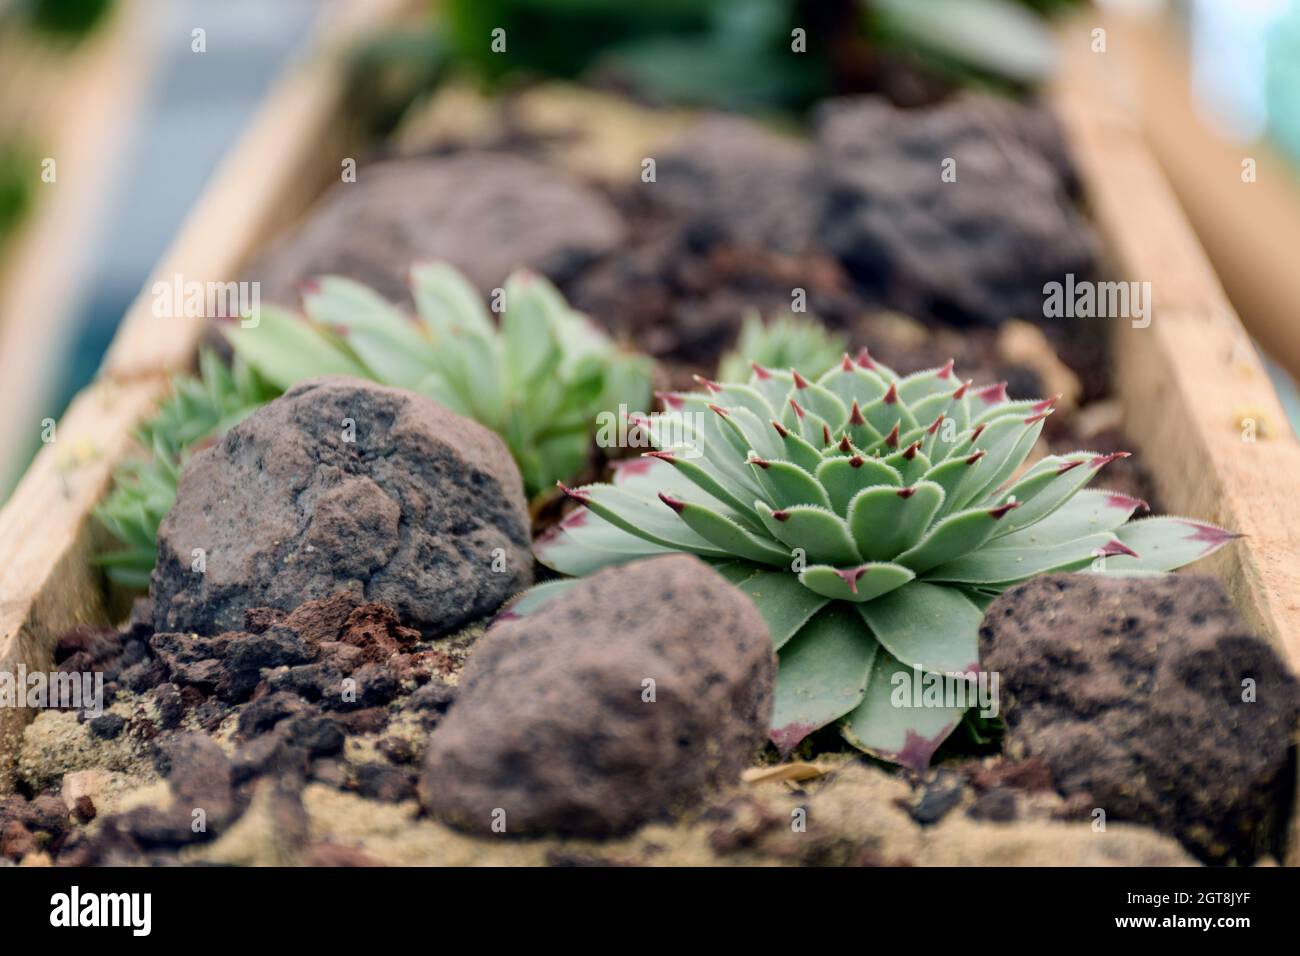 High Angle View Of Potted Plant. Succulent Plants. Stock Photo